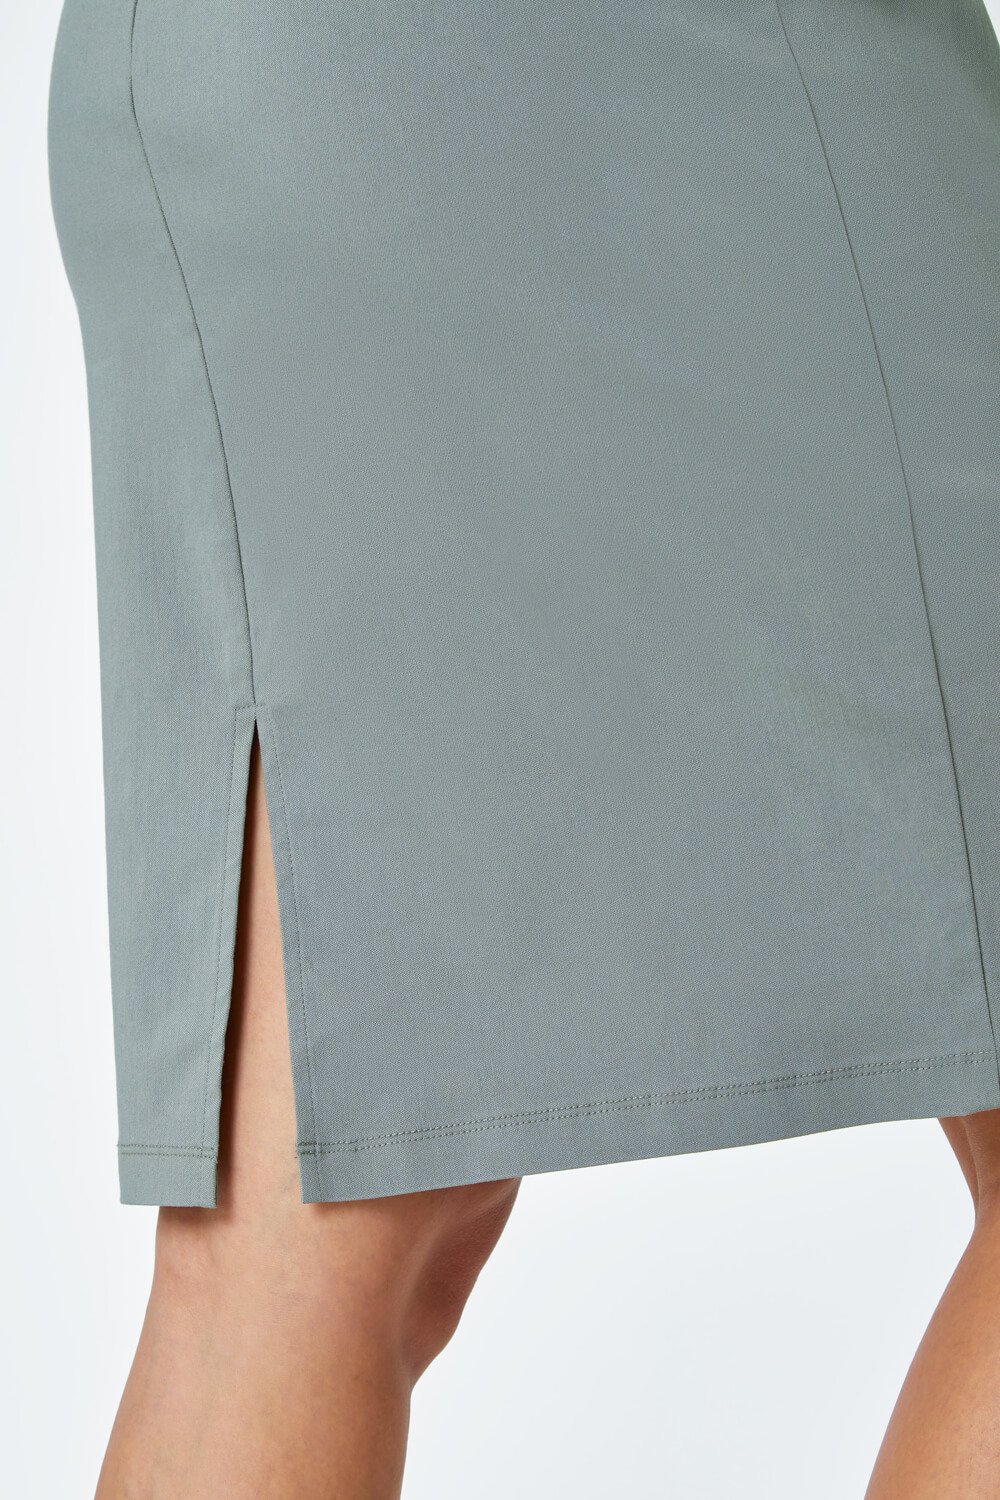 KHAKI Pull On Stretch Pencil Skirt, Image 5 of 5